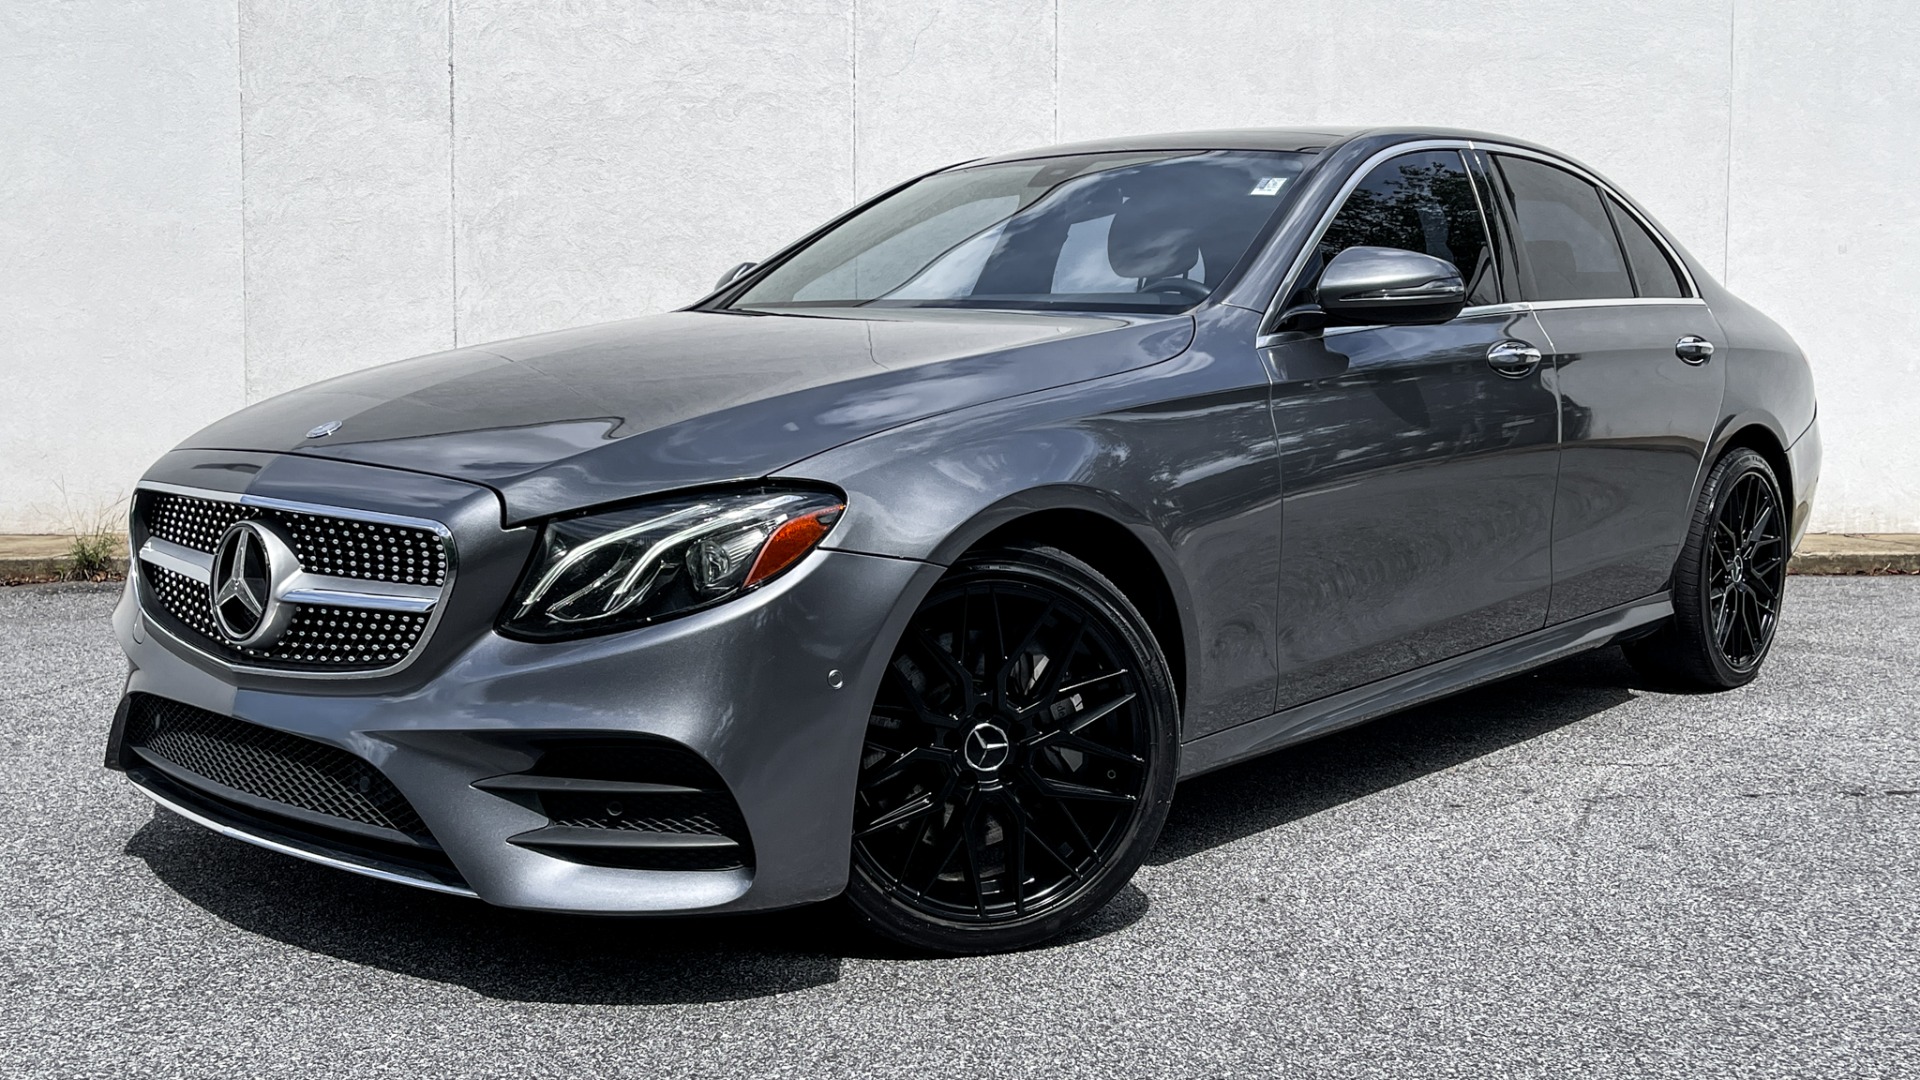 Used 2017 Mercedes-Benz E-Class E300 LUXURY / UPGRADED WHEELS / SPORT WHEEL / PREMIUM 1 / BURMESTER AUDIO for sale $29,995 at Formula Imports in Charlotte NC 28227 1